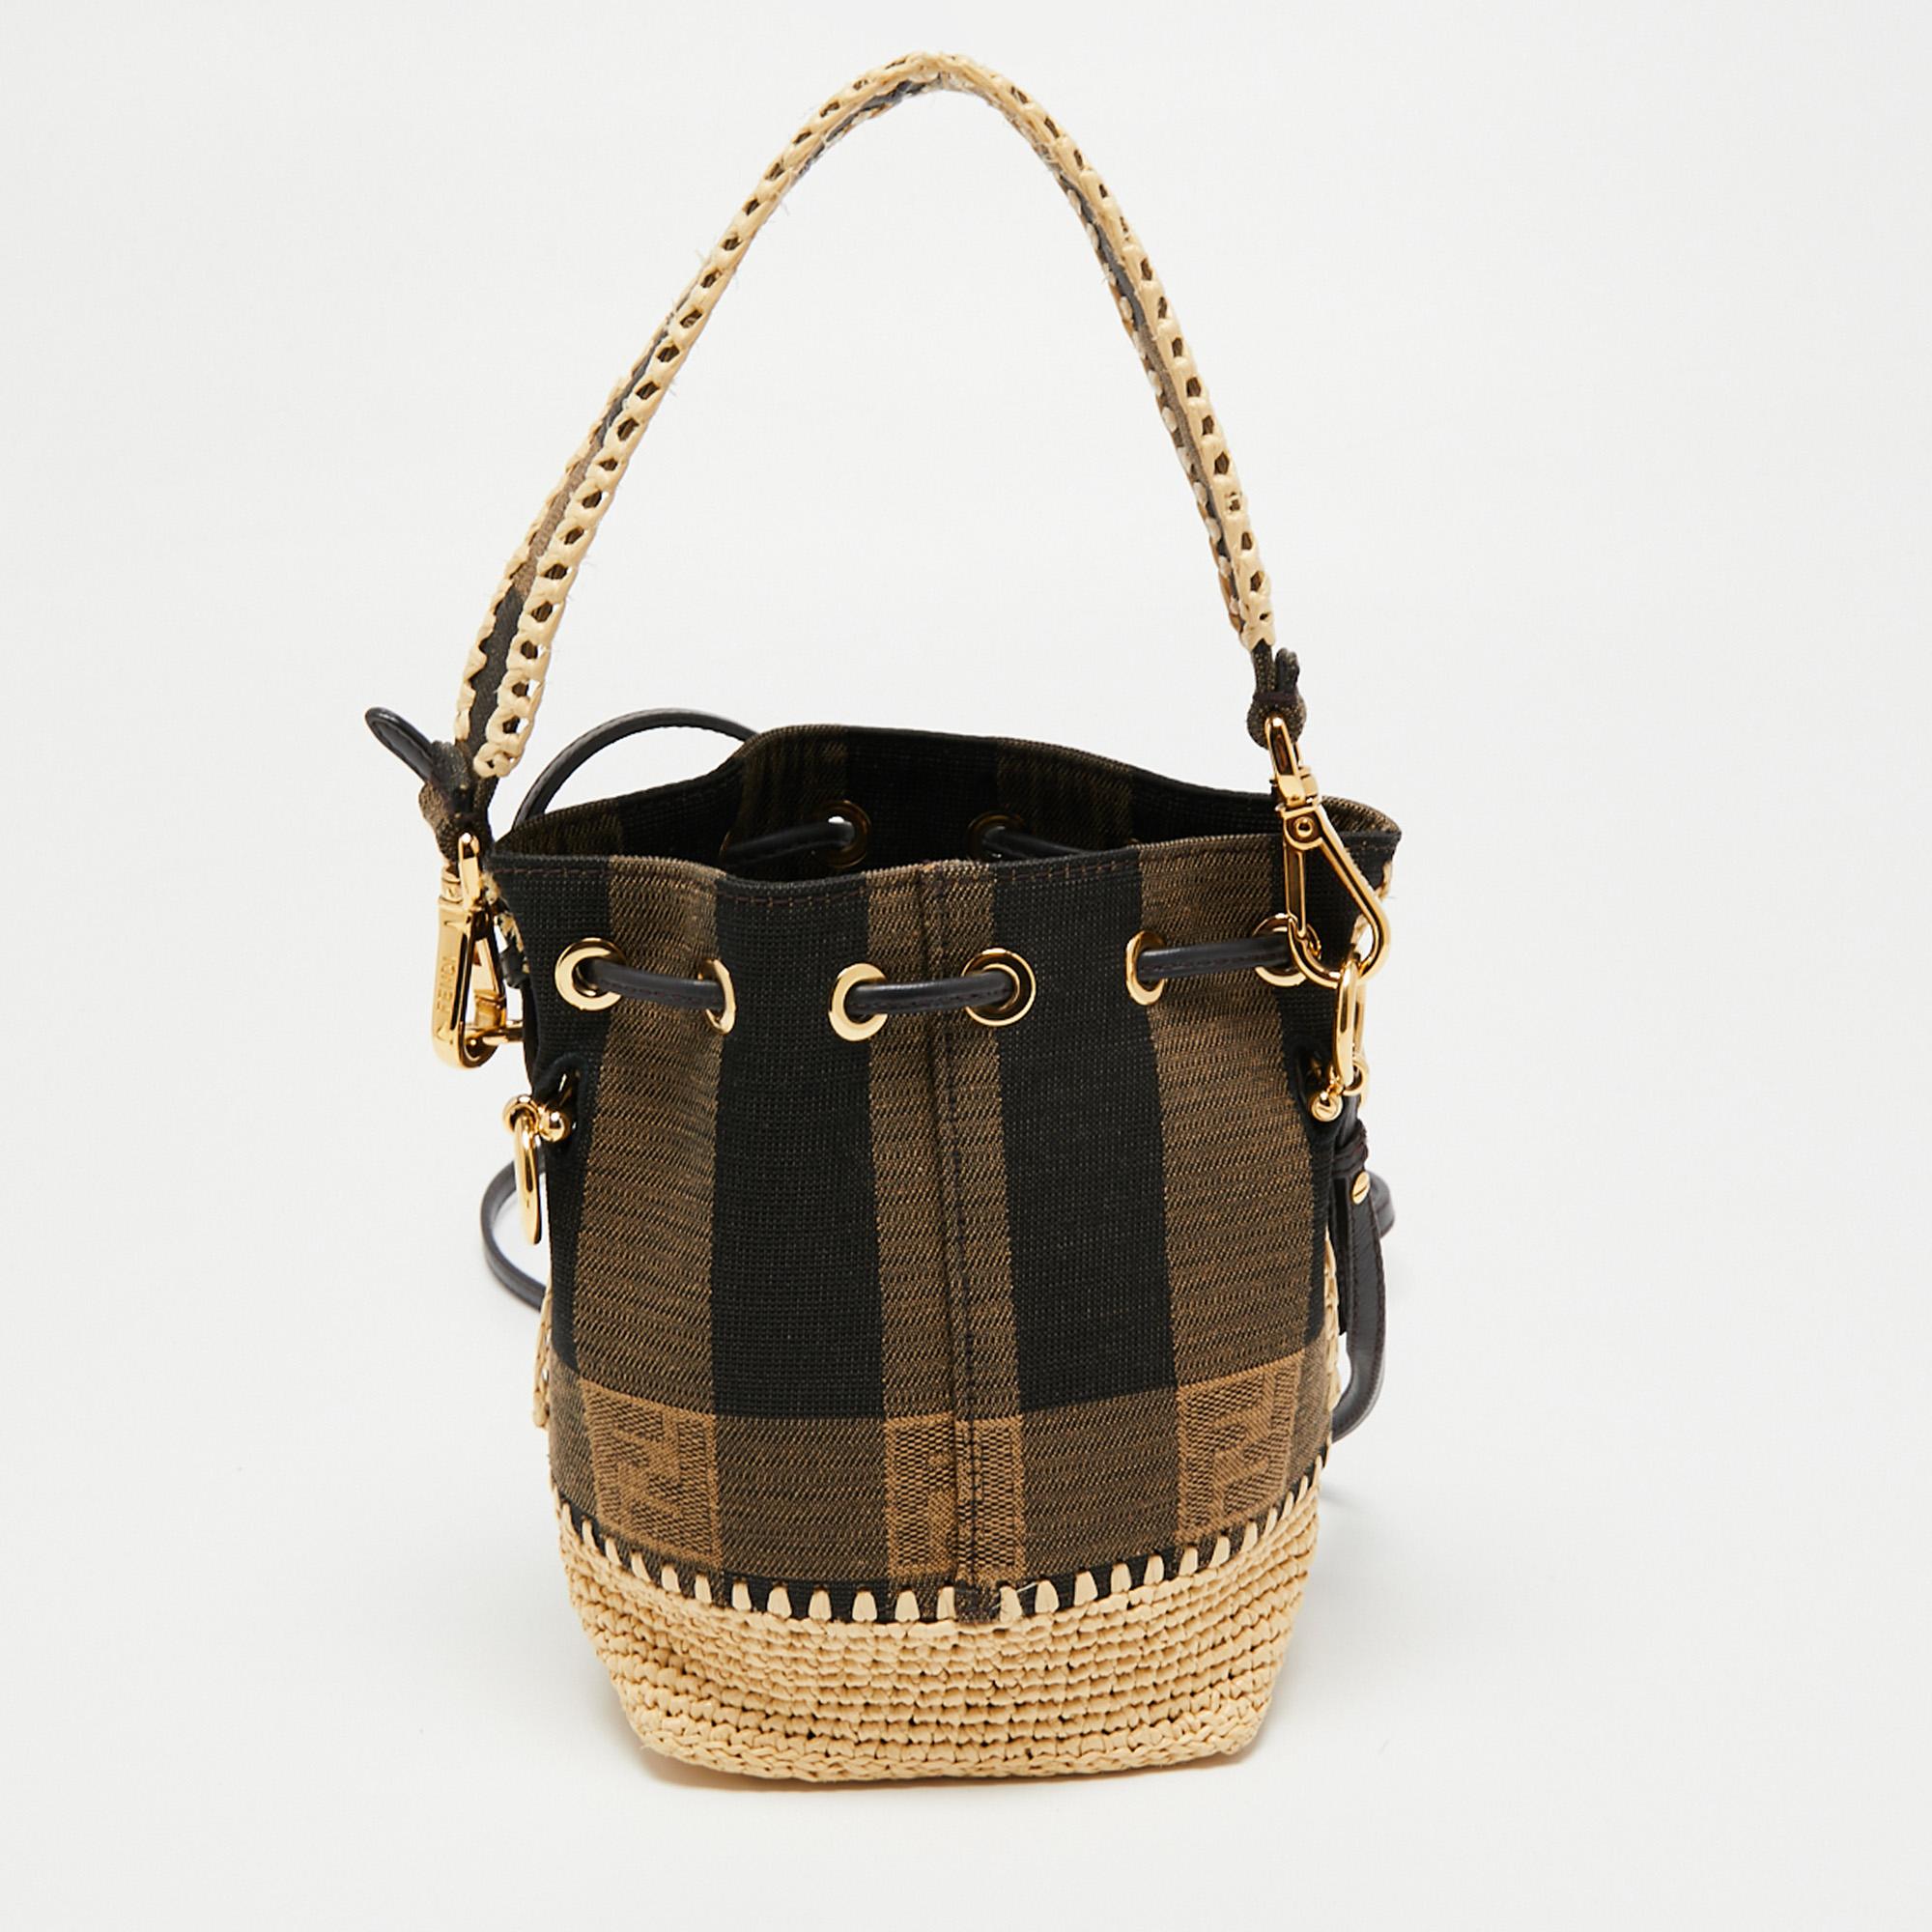 This wonderful Fendi design is made from Pequin canvas and enhanced with gold-tone hardware. The bag has a bucket shape with a drawstring closure that secures the interior. It is complete with a single handle and a shoulder strap.

Includes: